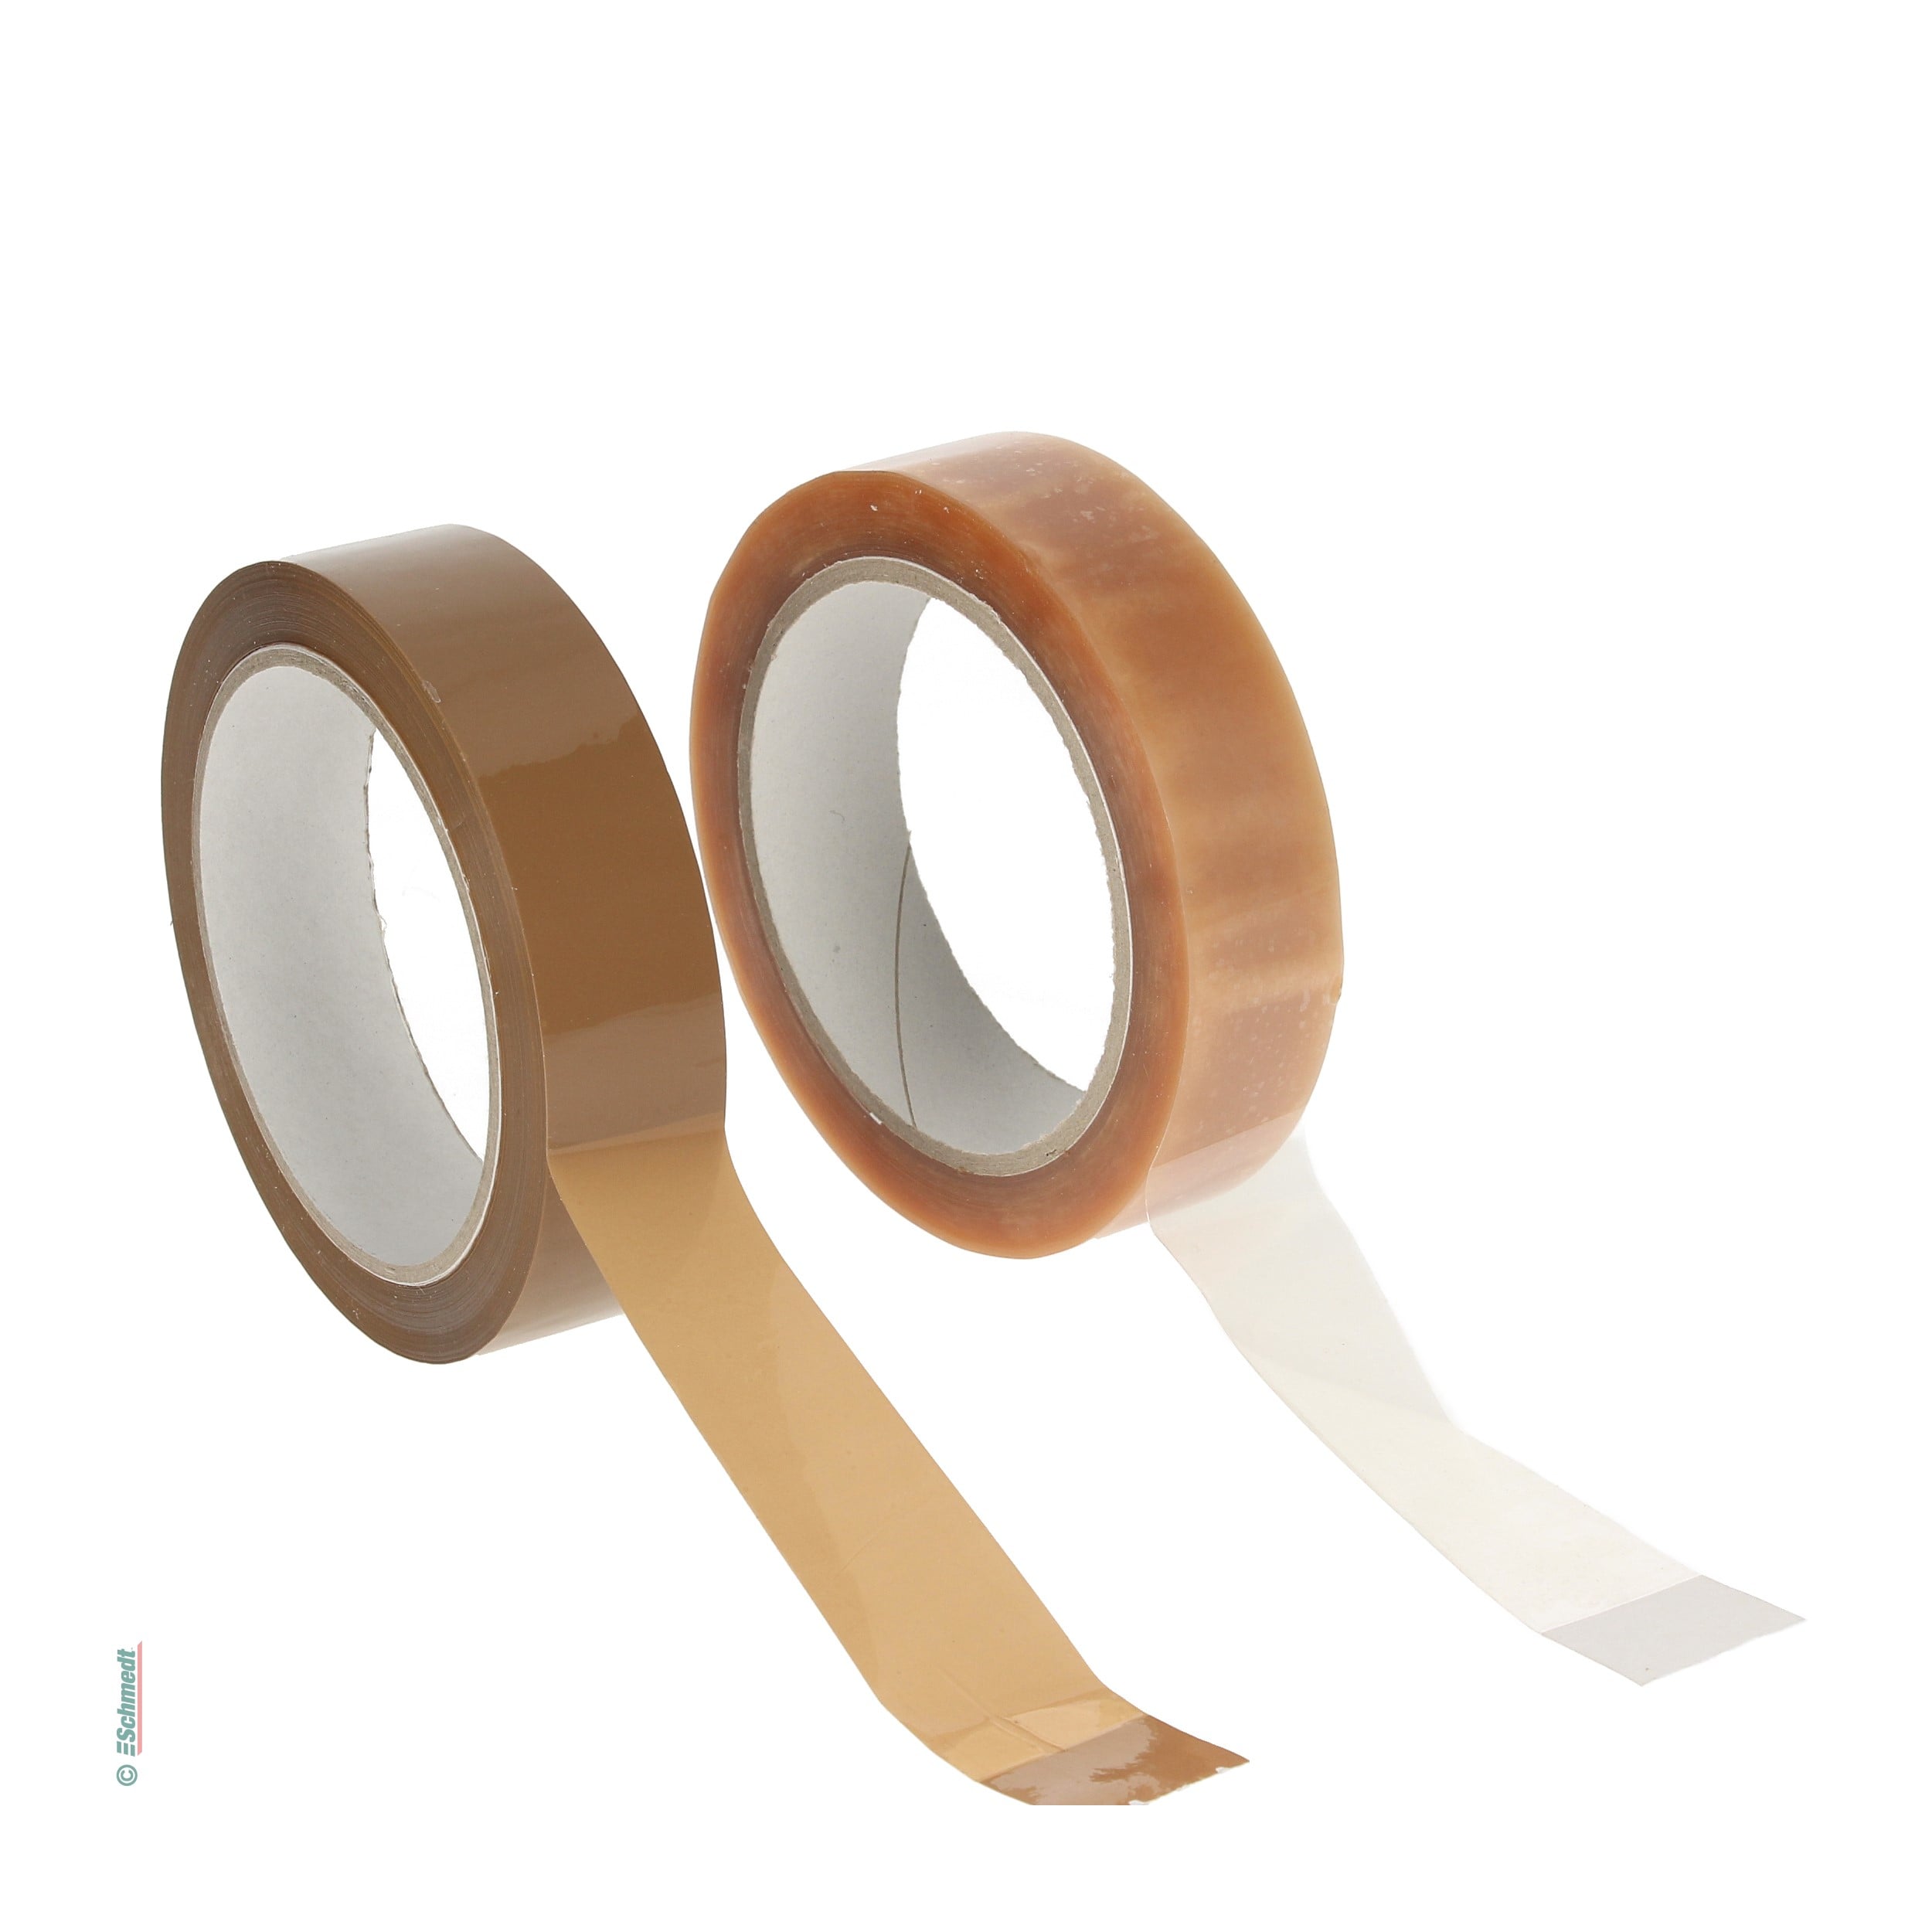 Adhesive tape  Adhesive products, fastening, packaging material